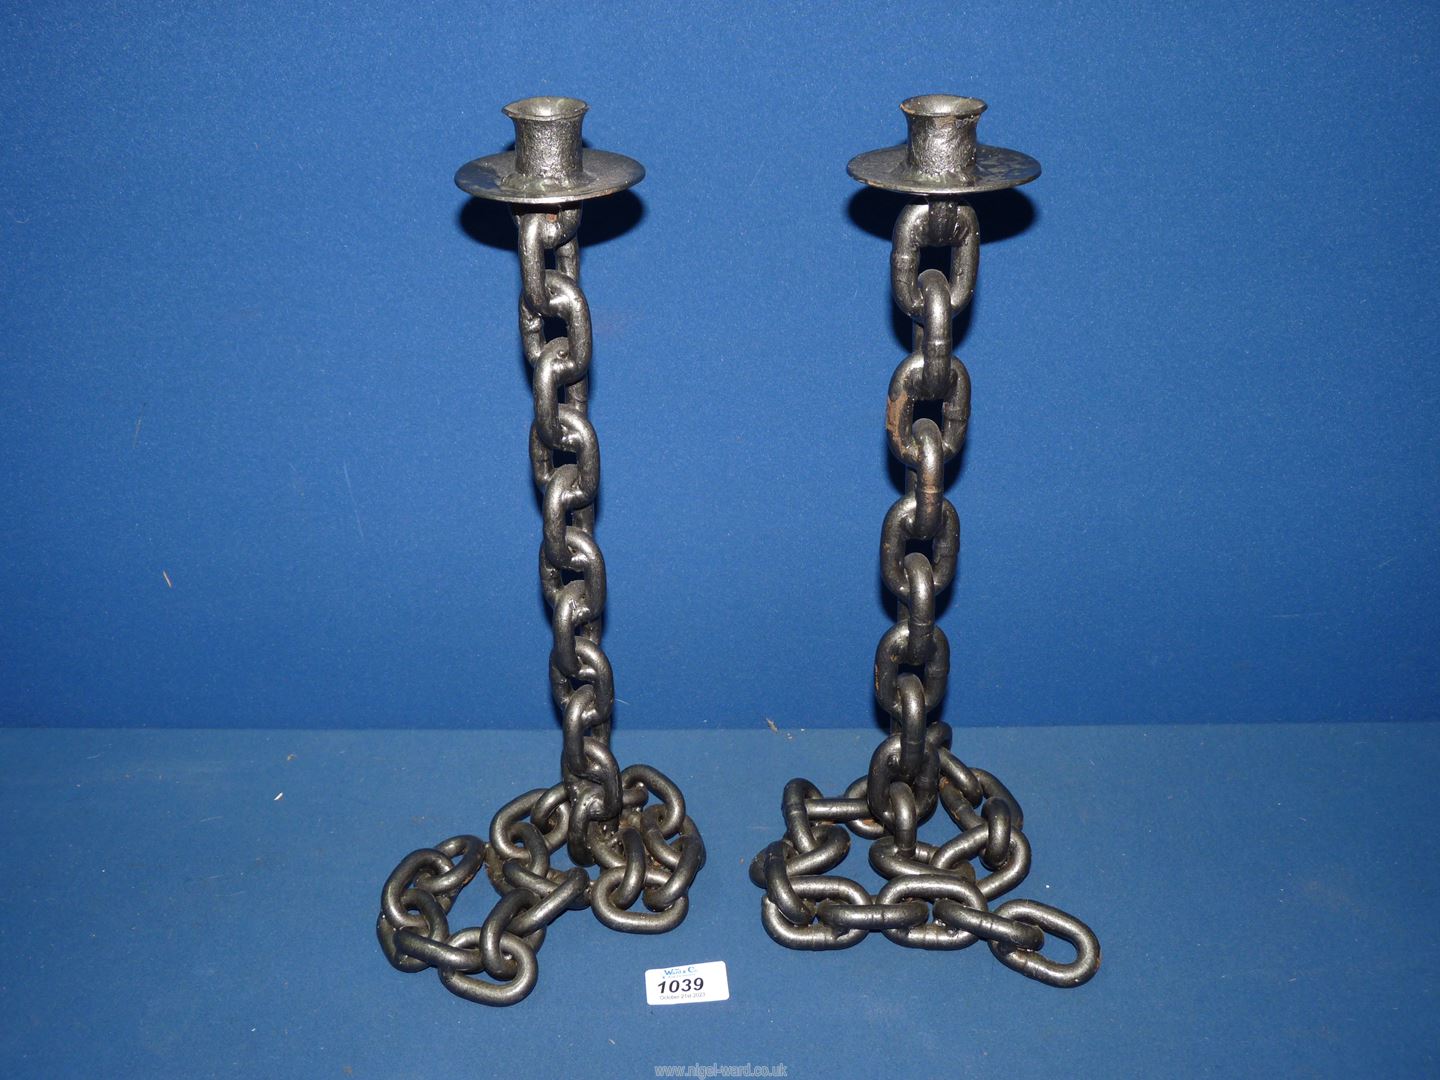 Two chain effect candlesticks, 15 3/4".